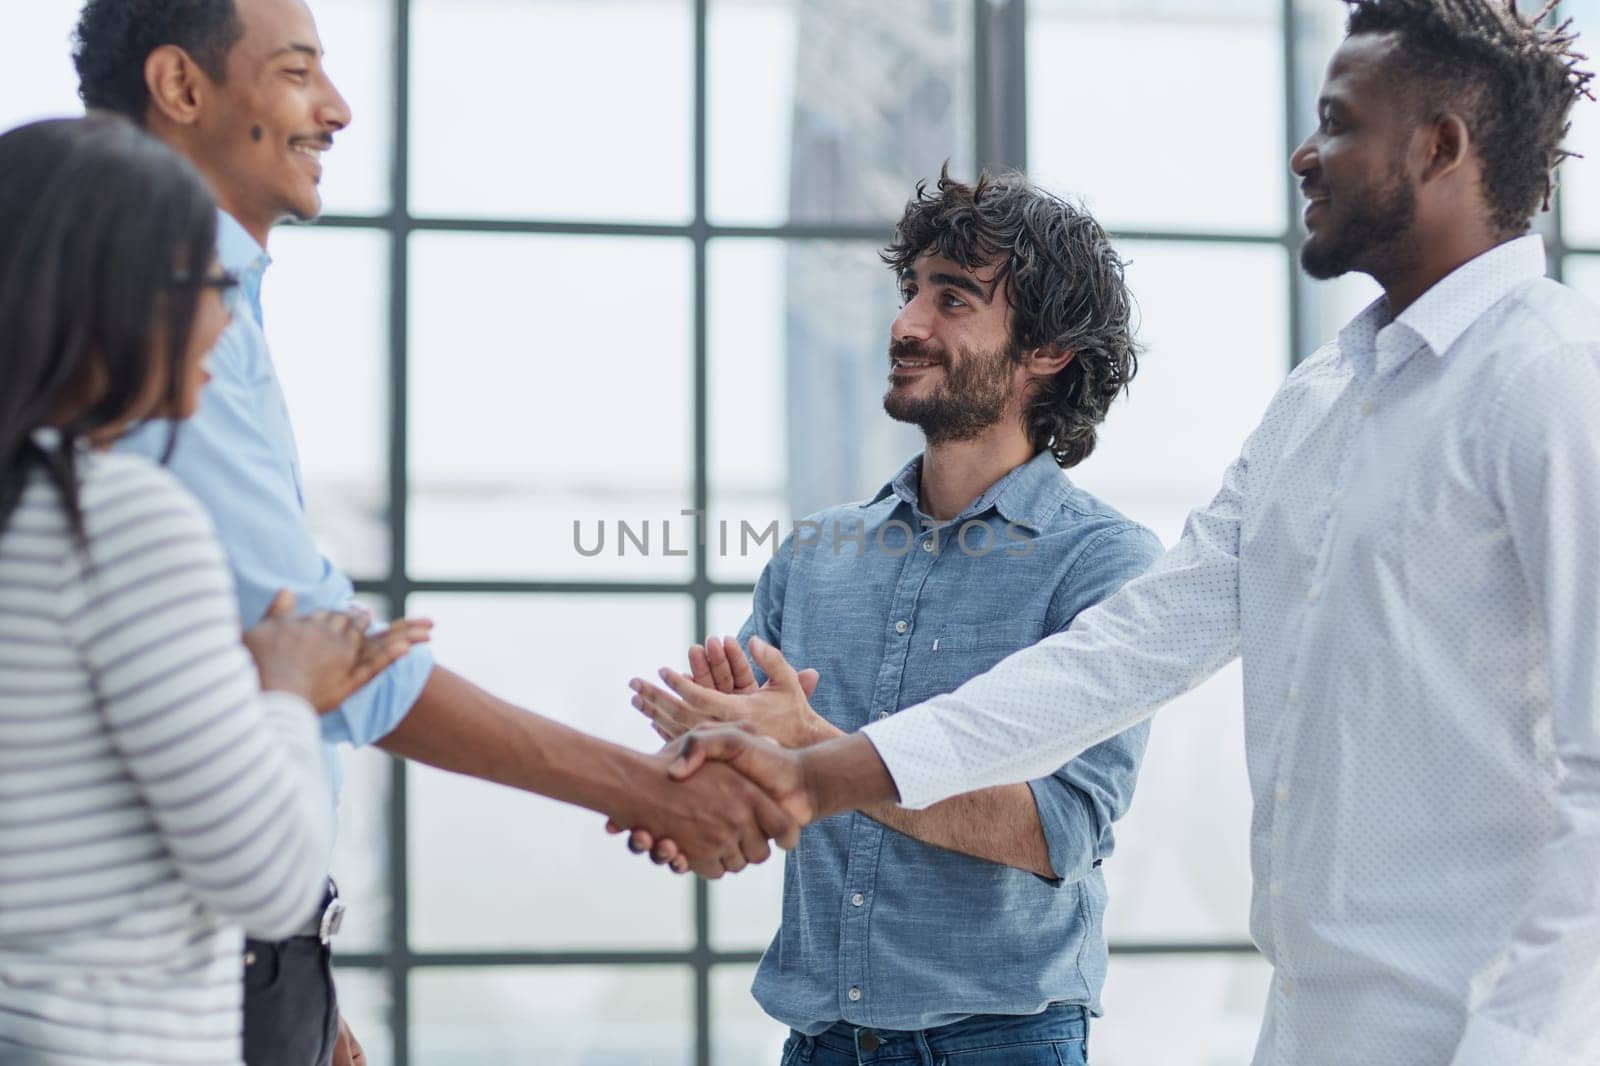 Successful Business Collaboration: Executives Greet with Handshake in Office by Prosto